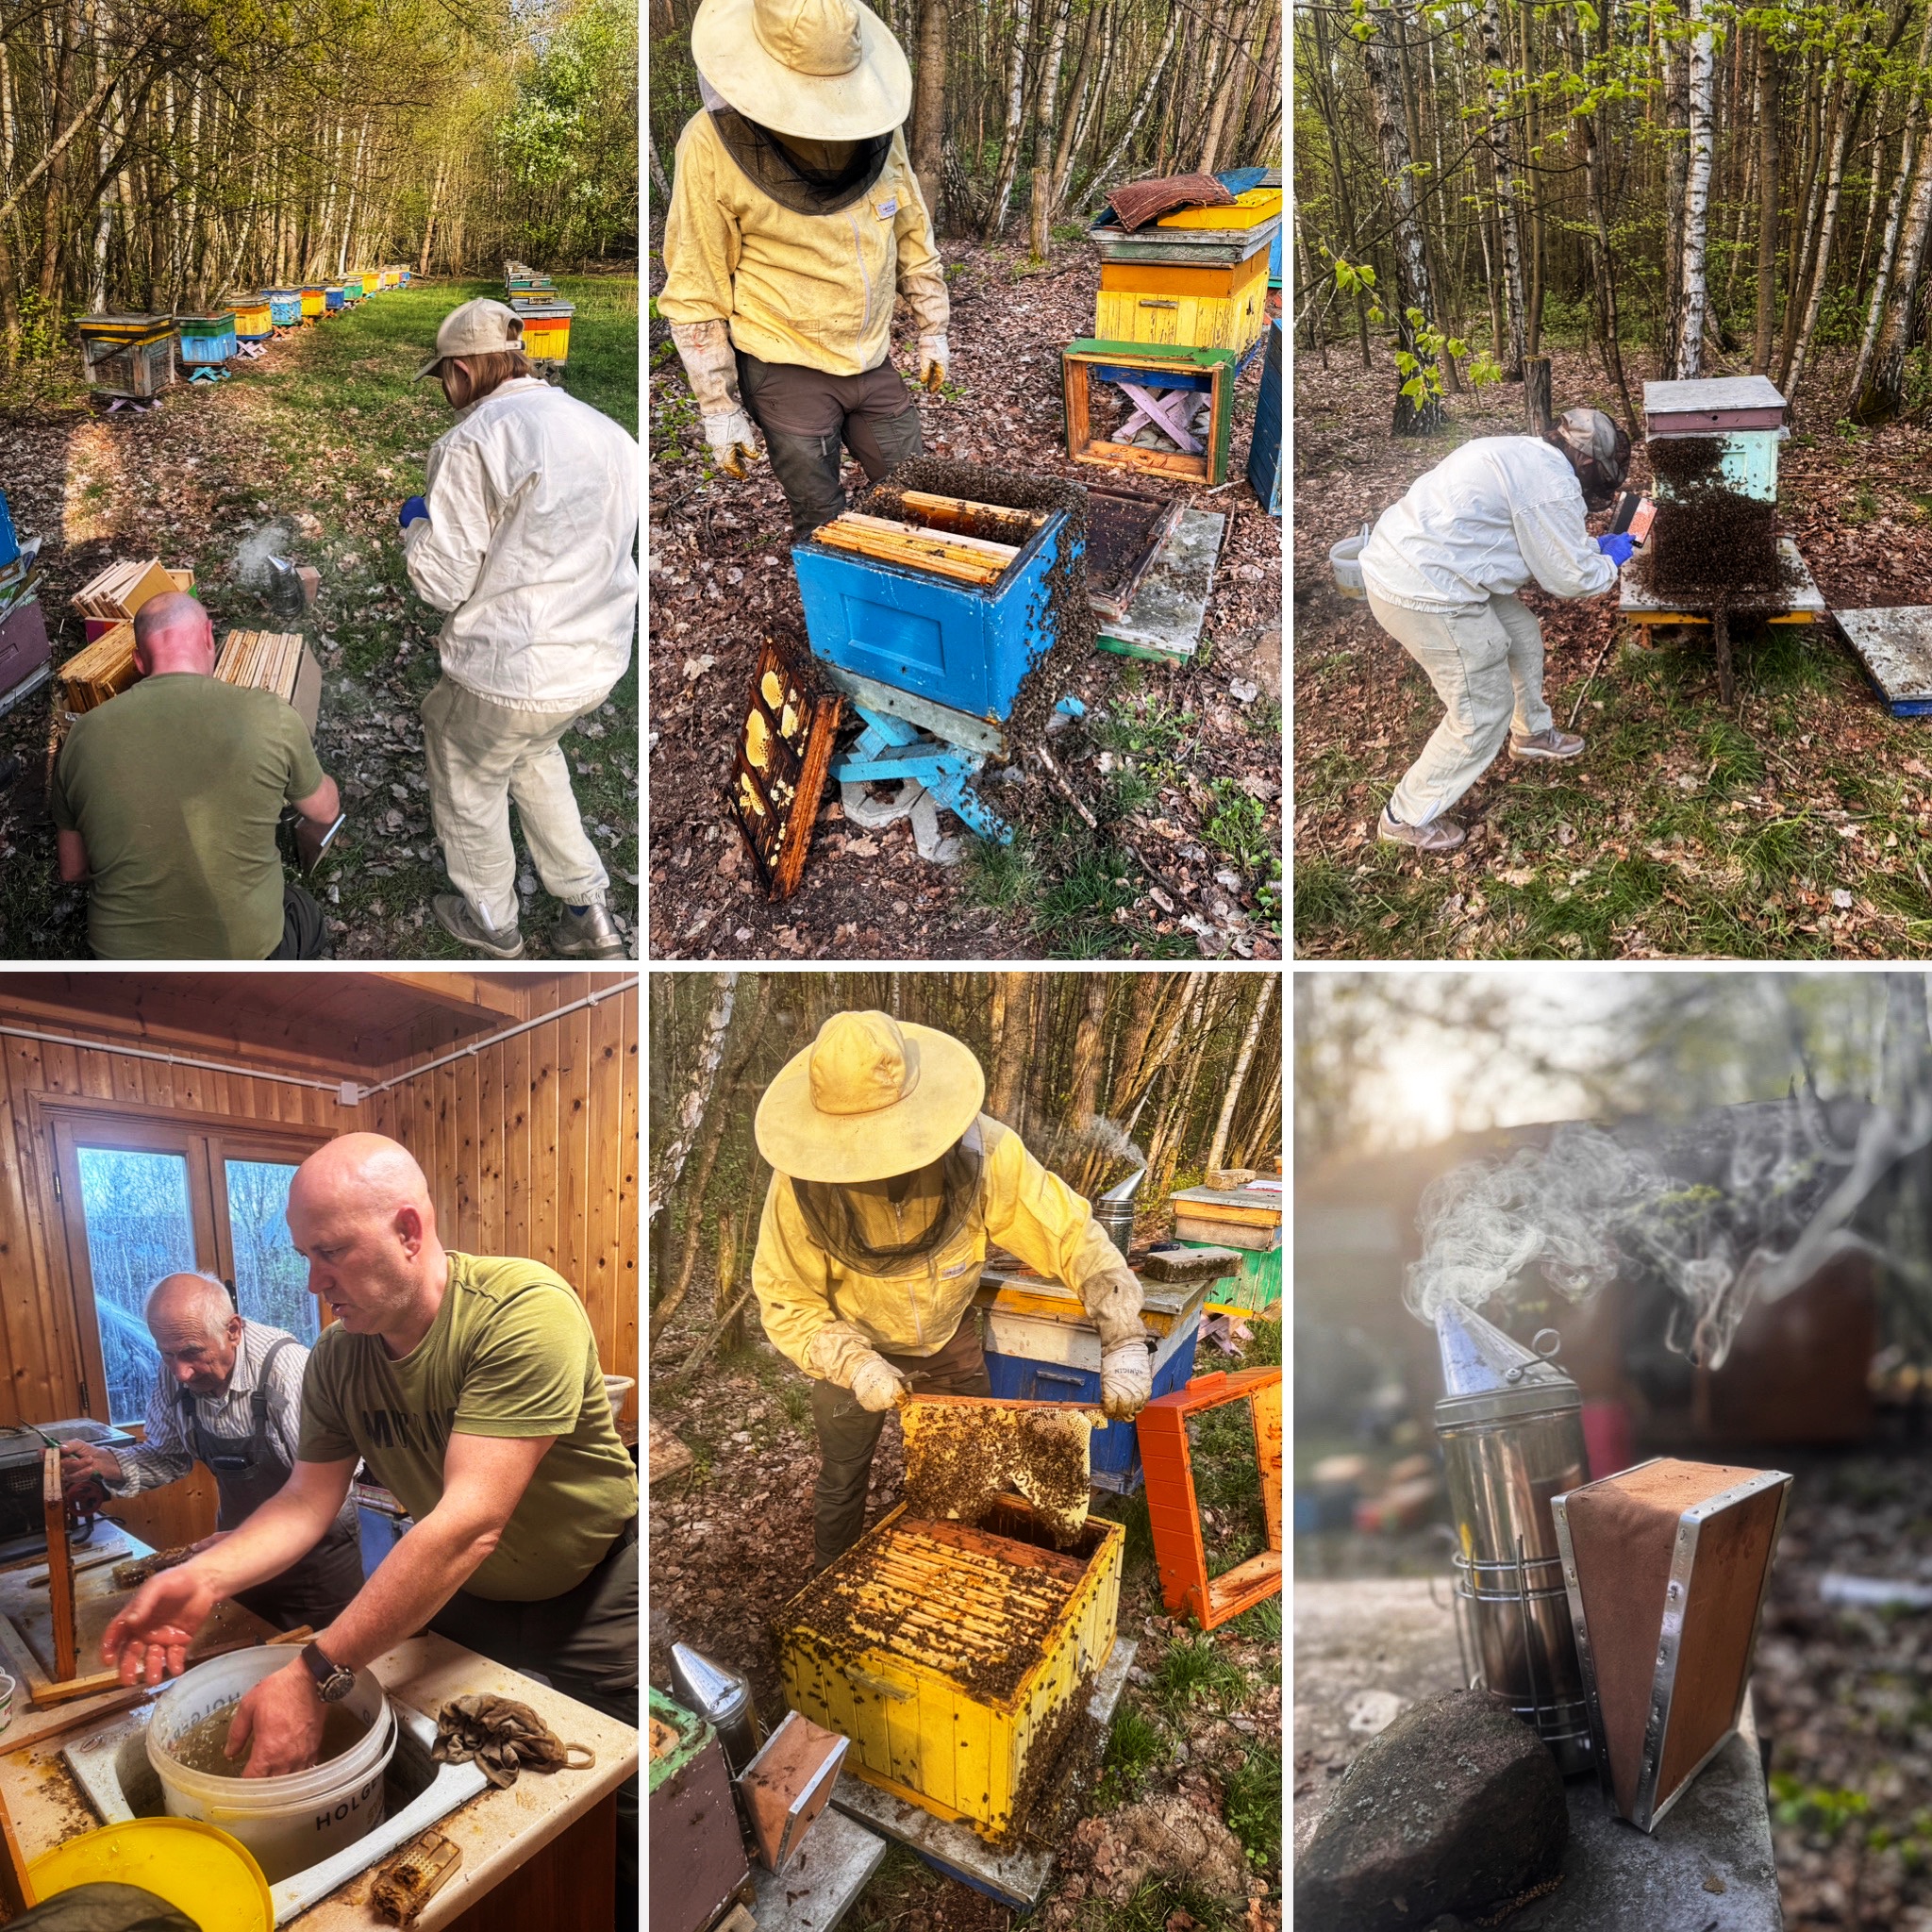 Work at the apiary